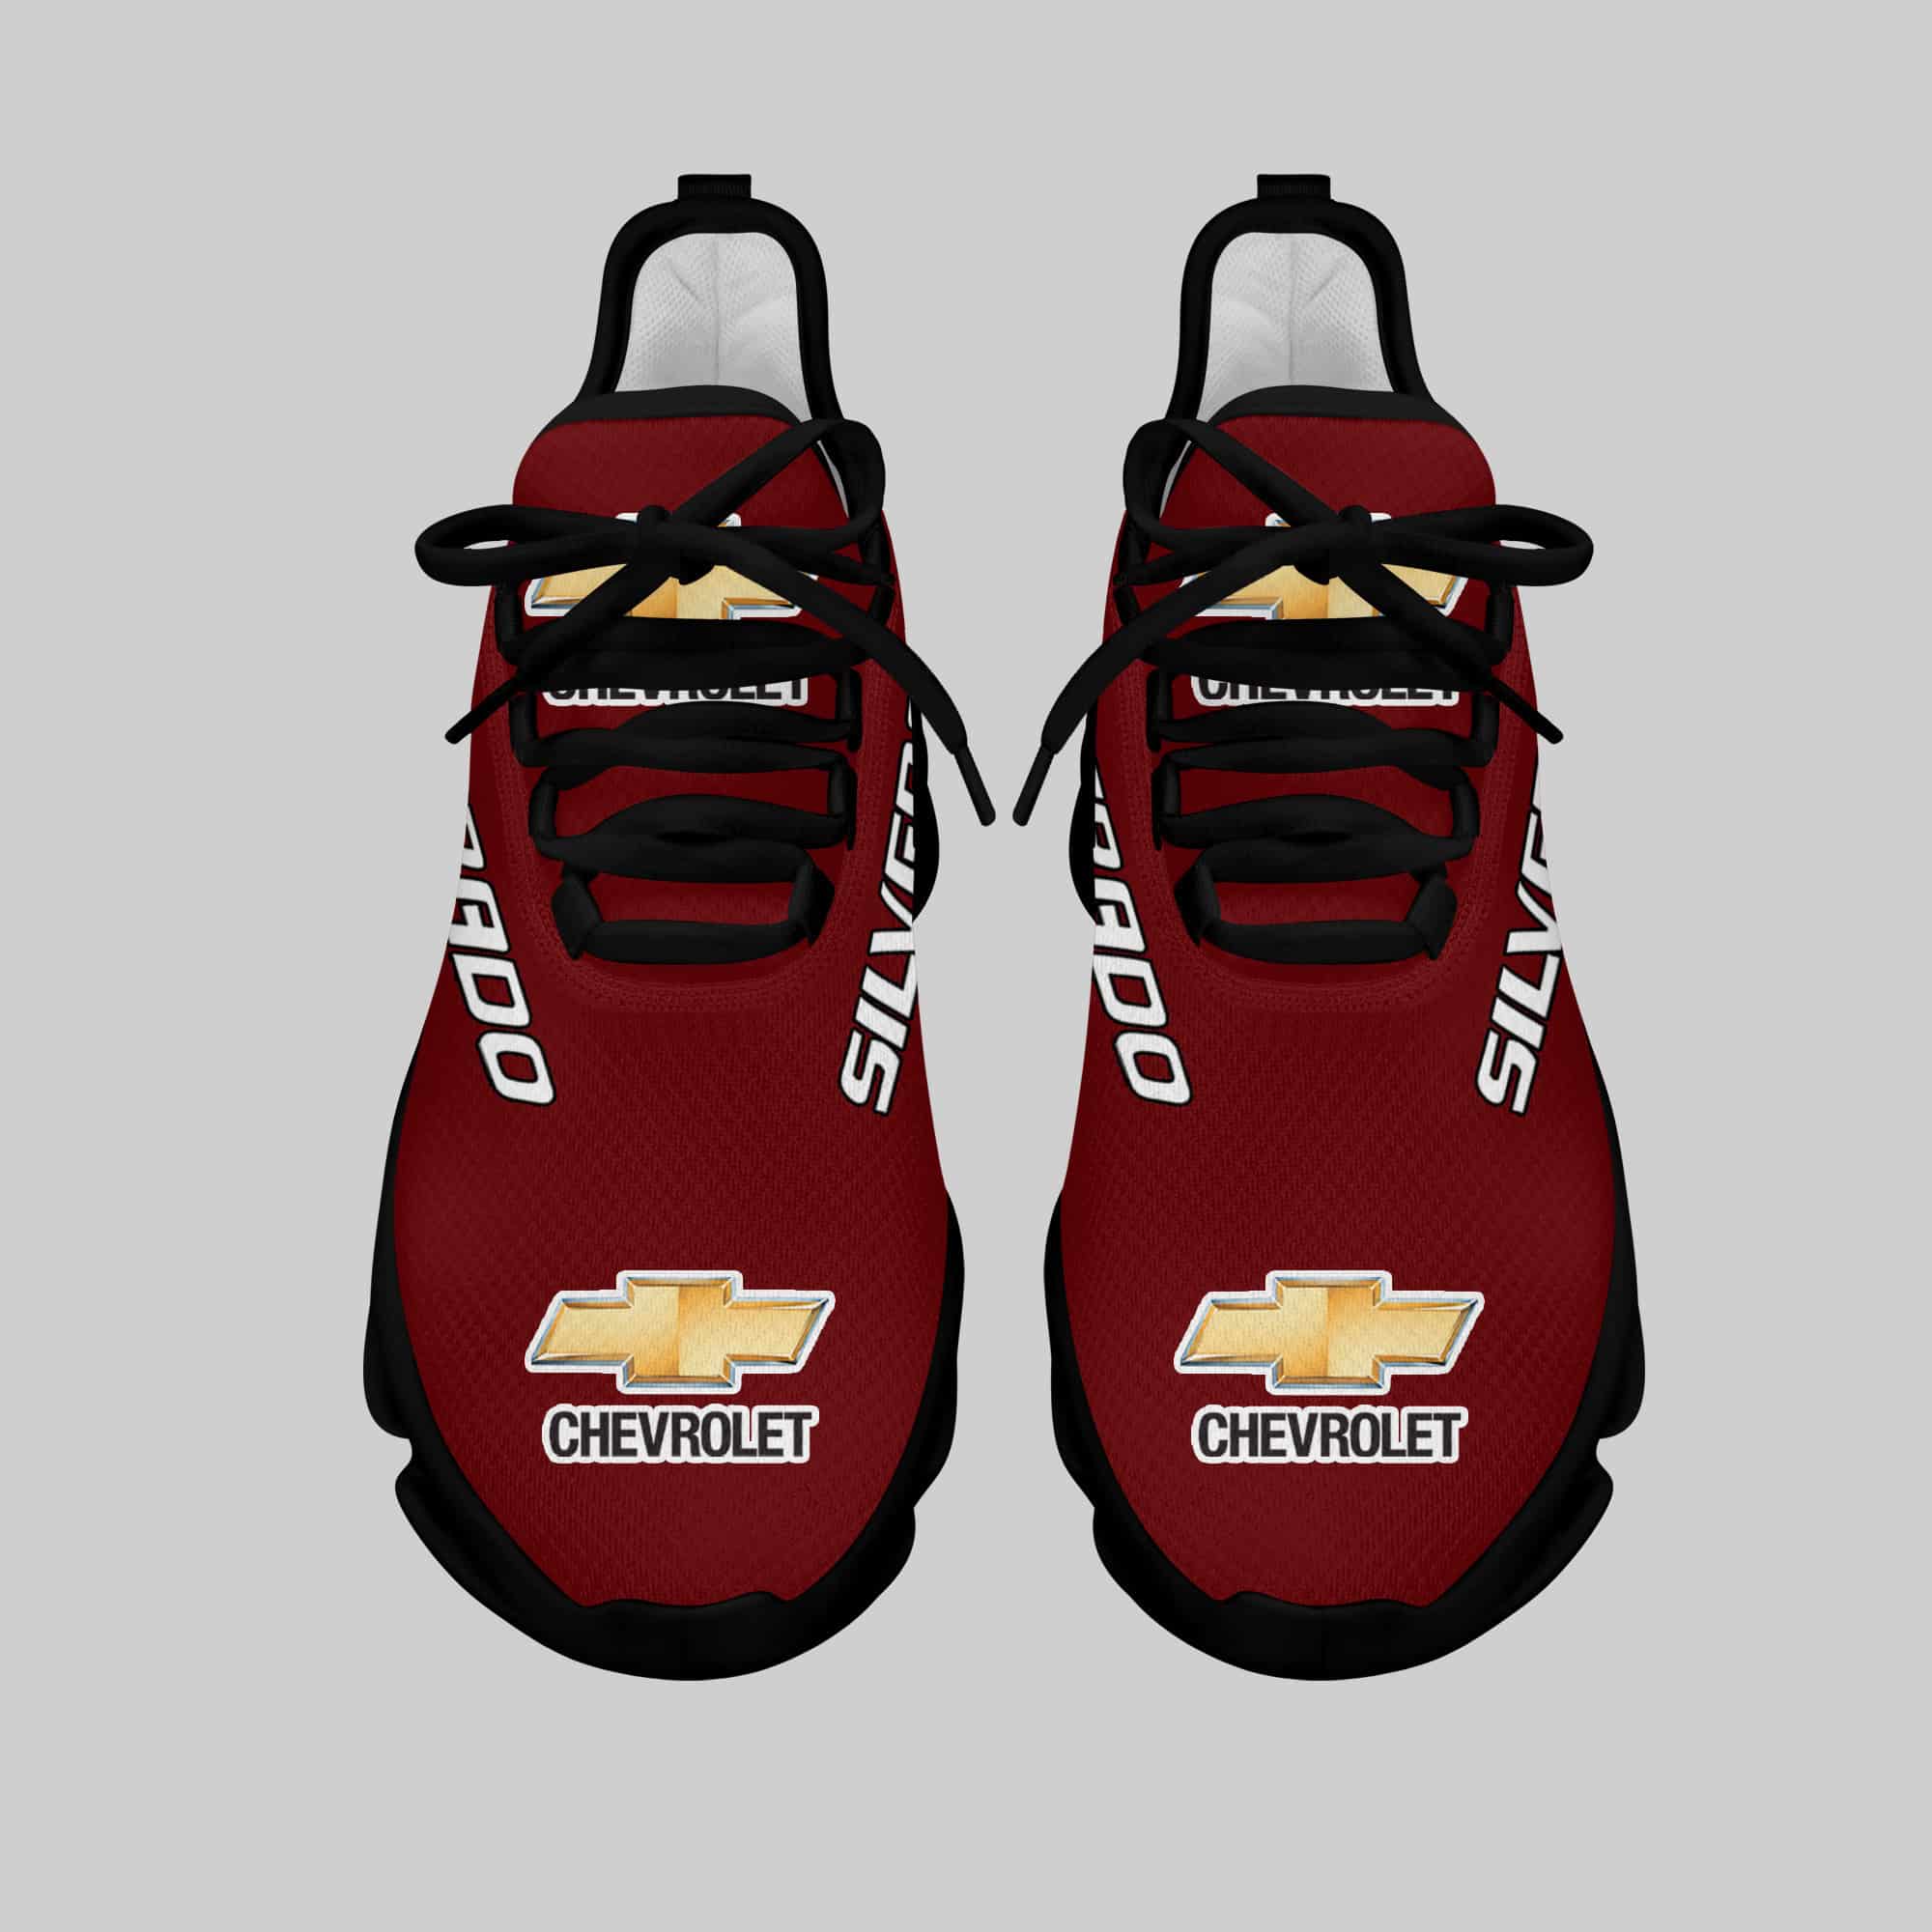 Chevrolet Silverado - Running Shoes Max Soul Shoes Sneakers Ver 8 4